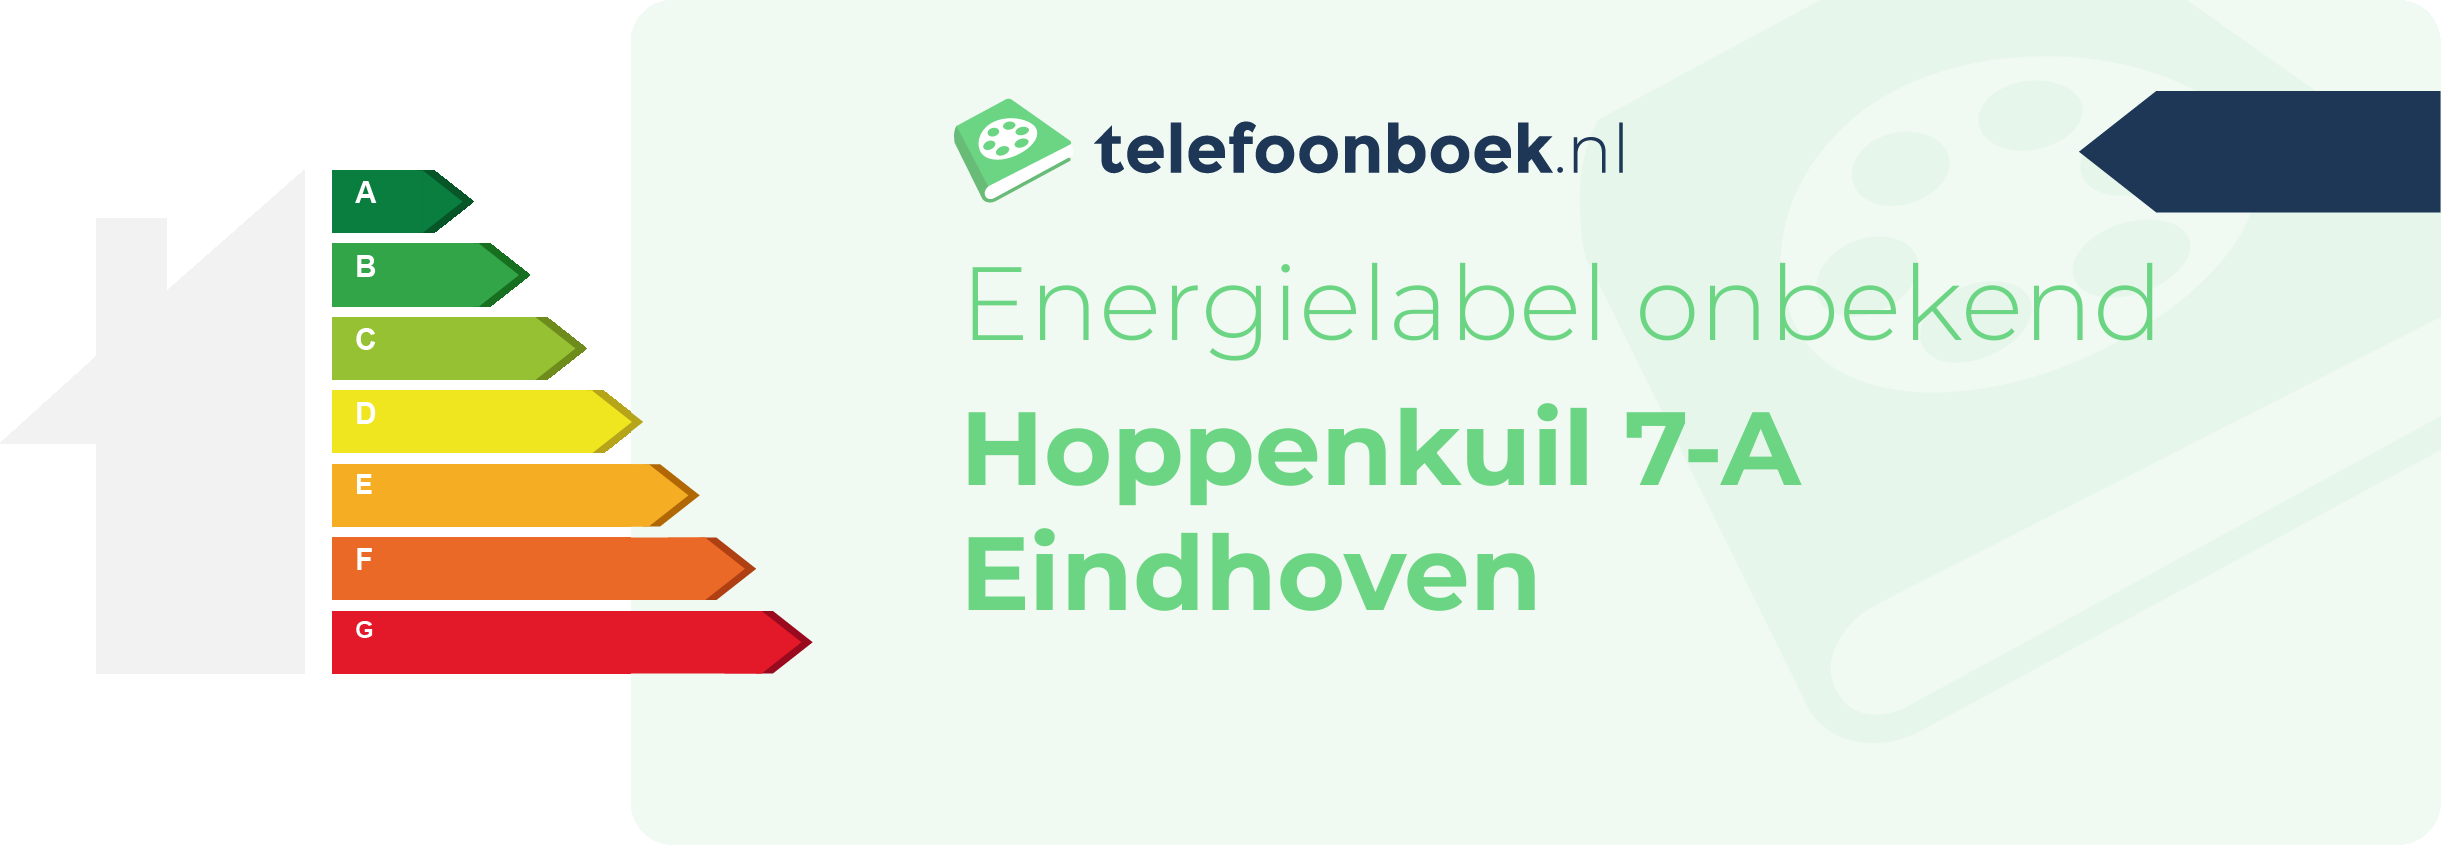 Energielabel Hoppenkuil 7-A Eindhoven